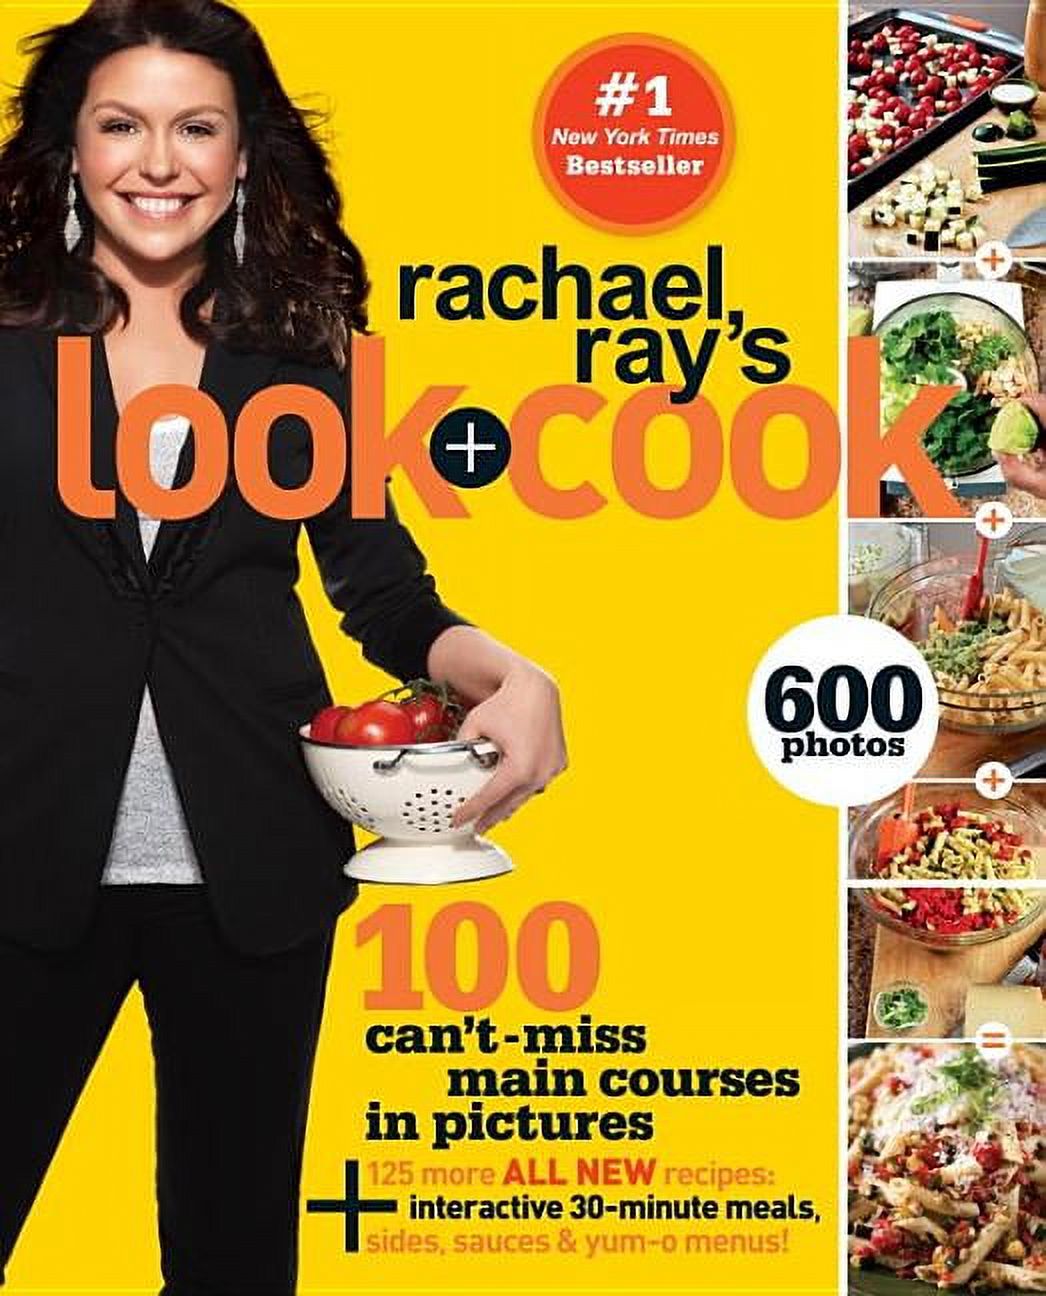 Rachael Ray's Look + Cook : 100 Can't Miss Main Courses in Pictures, Plus 125 All New Recipes: A Cookbook (Paperback) - image 1 of 2